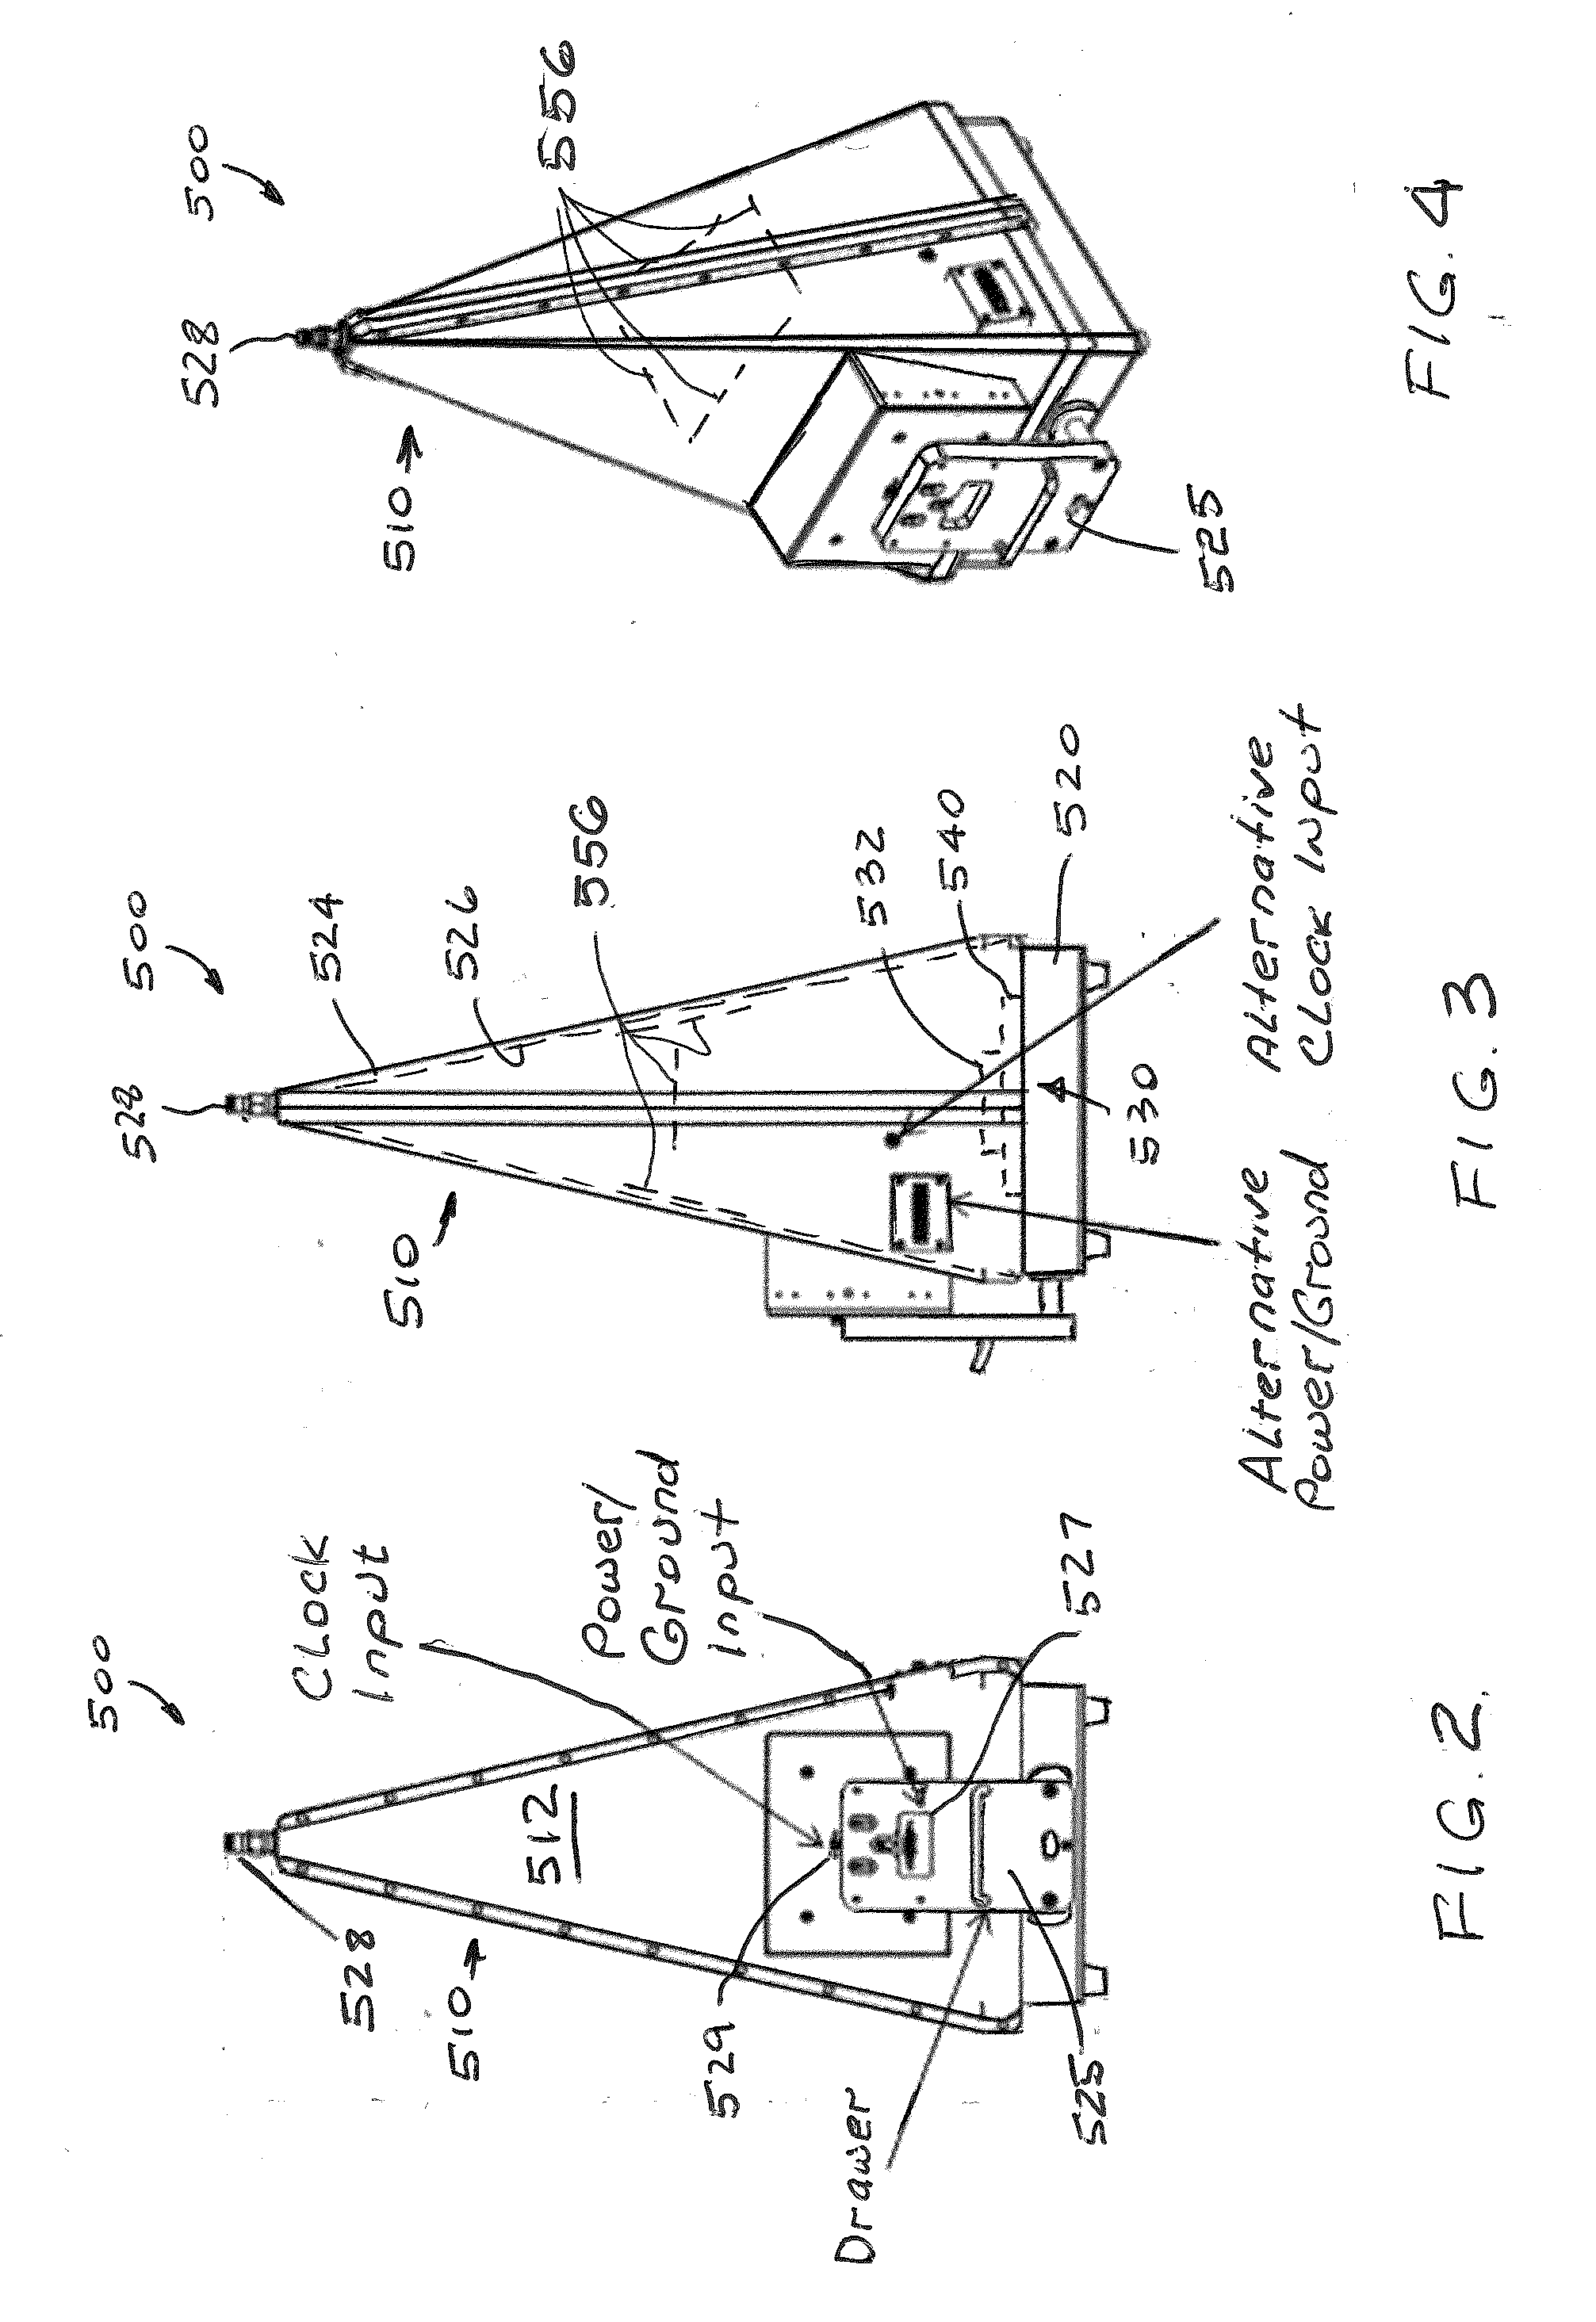 Method and Apparatus for Detection and Identification of Counterfeit and Substandard Electronics